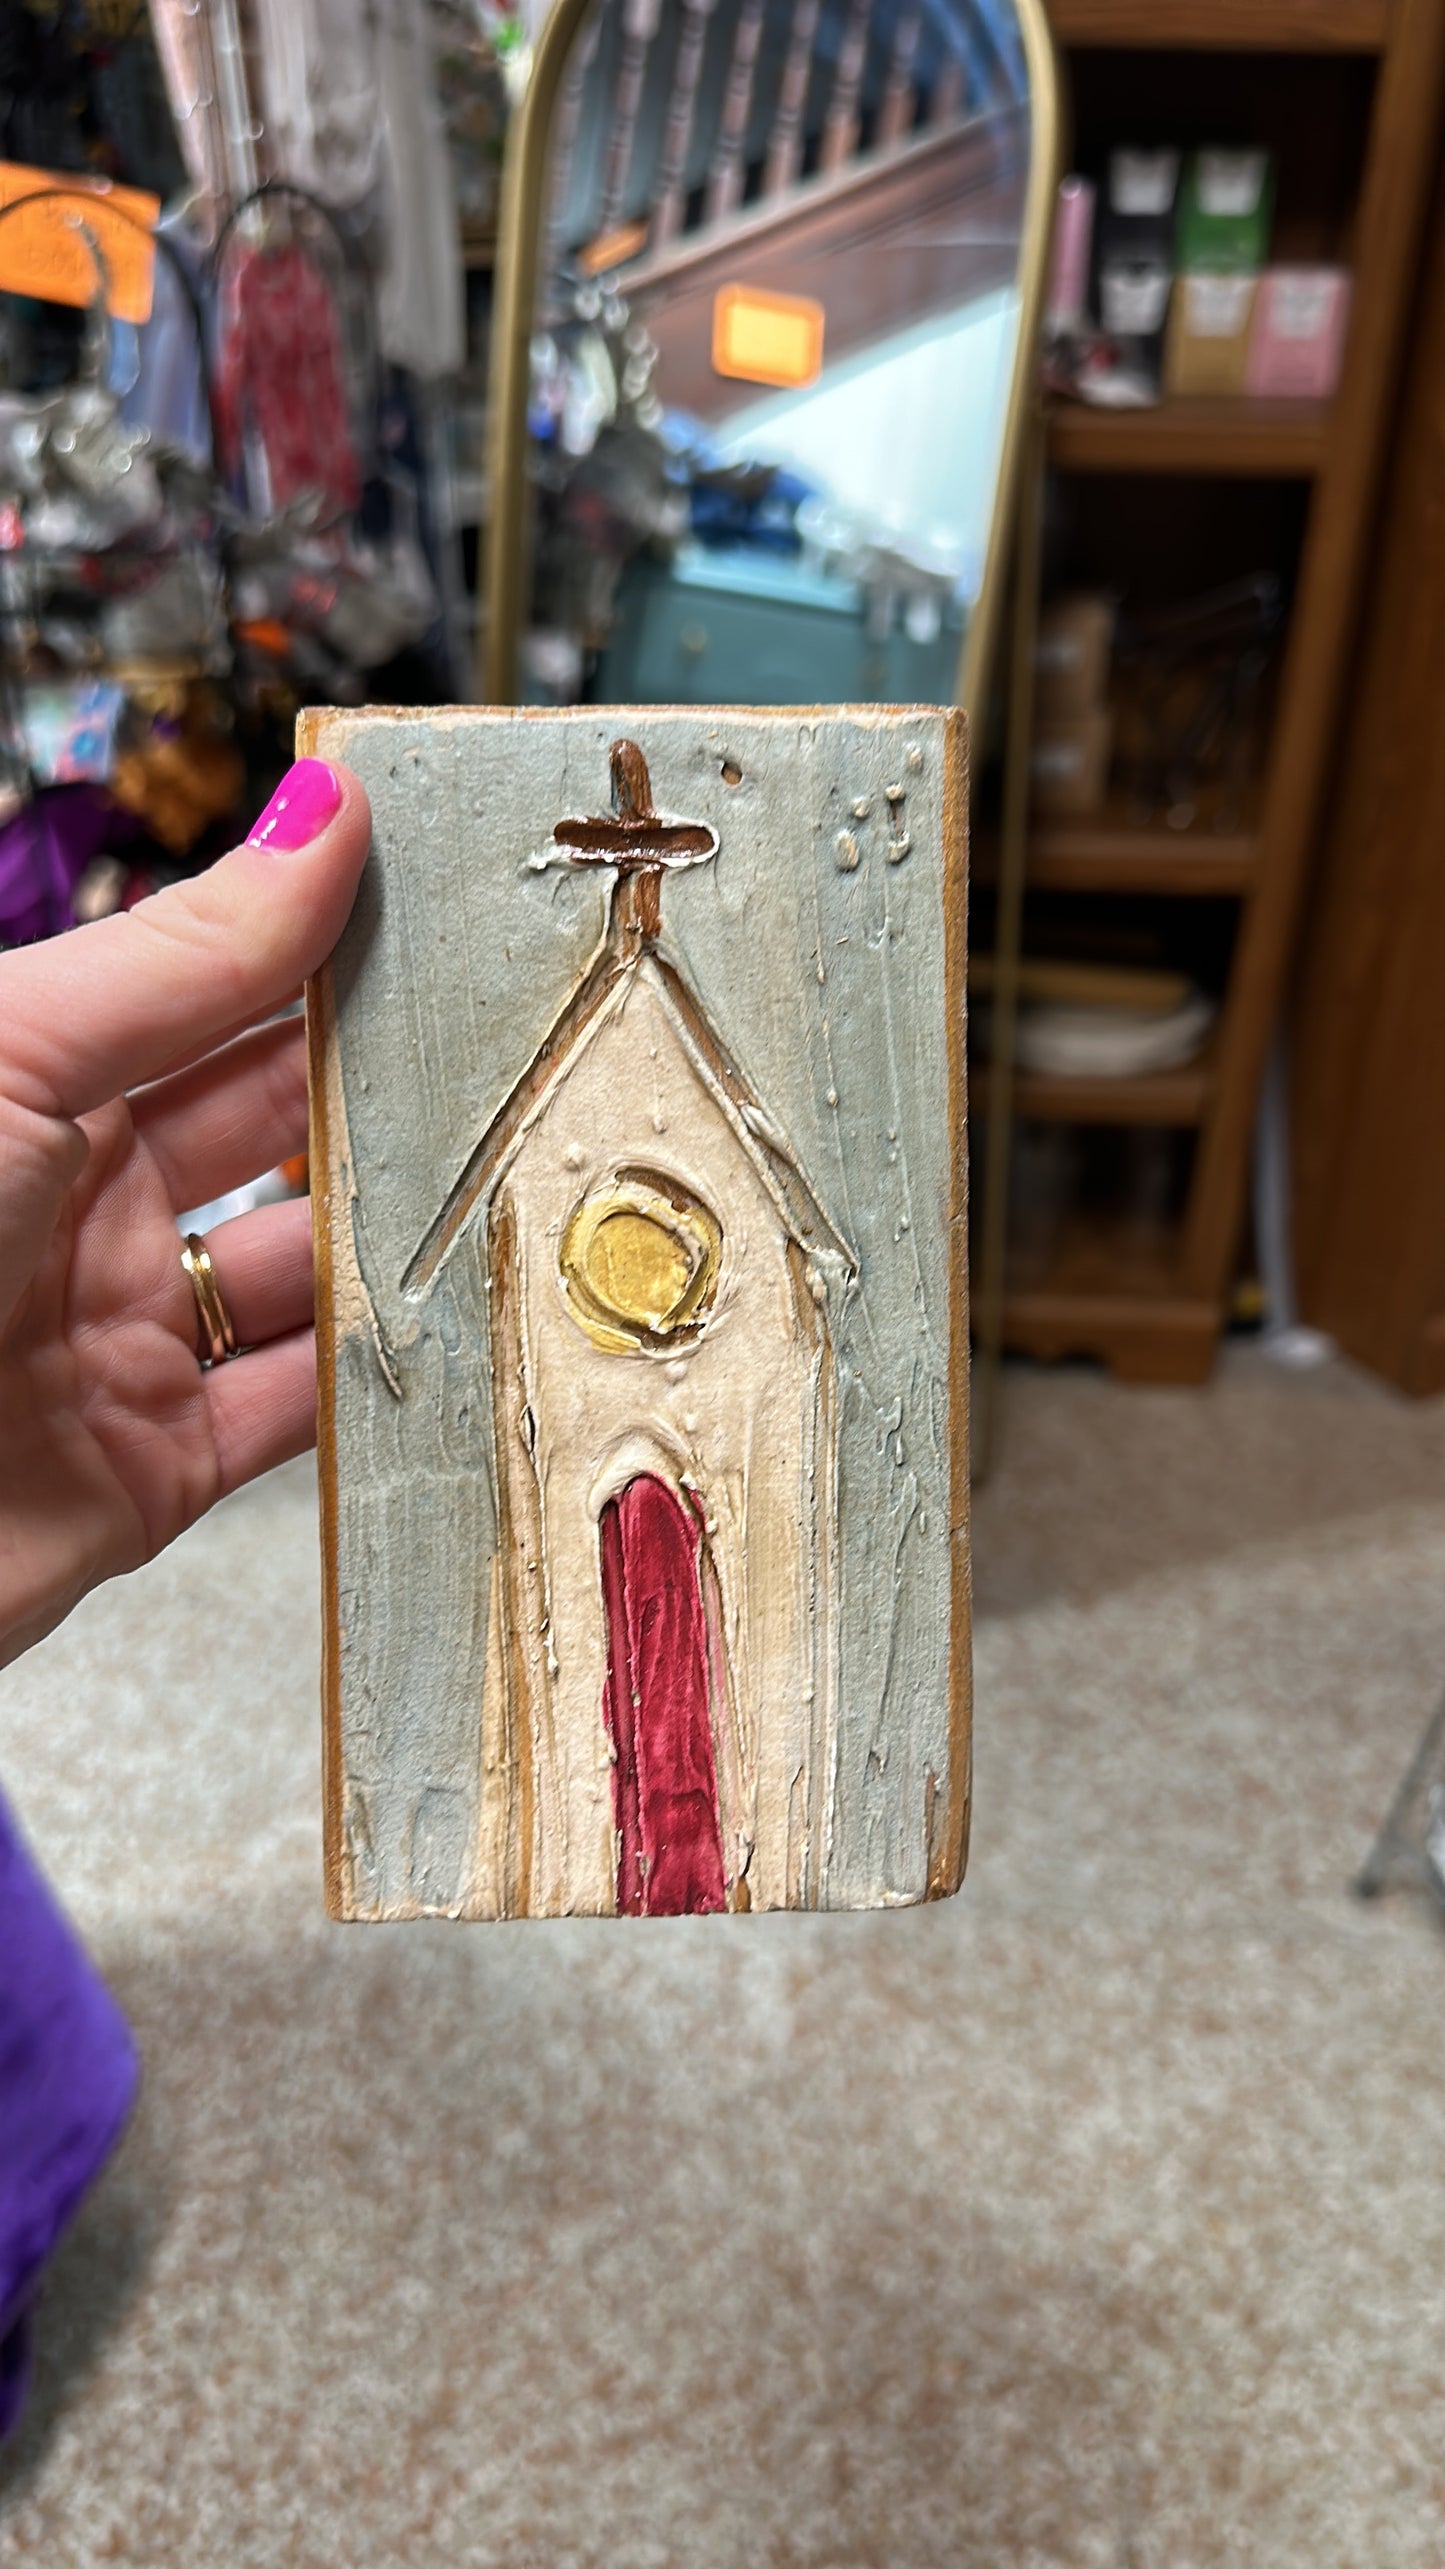 Painted Church on Wood